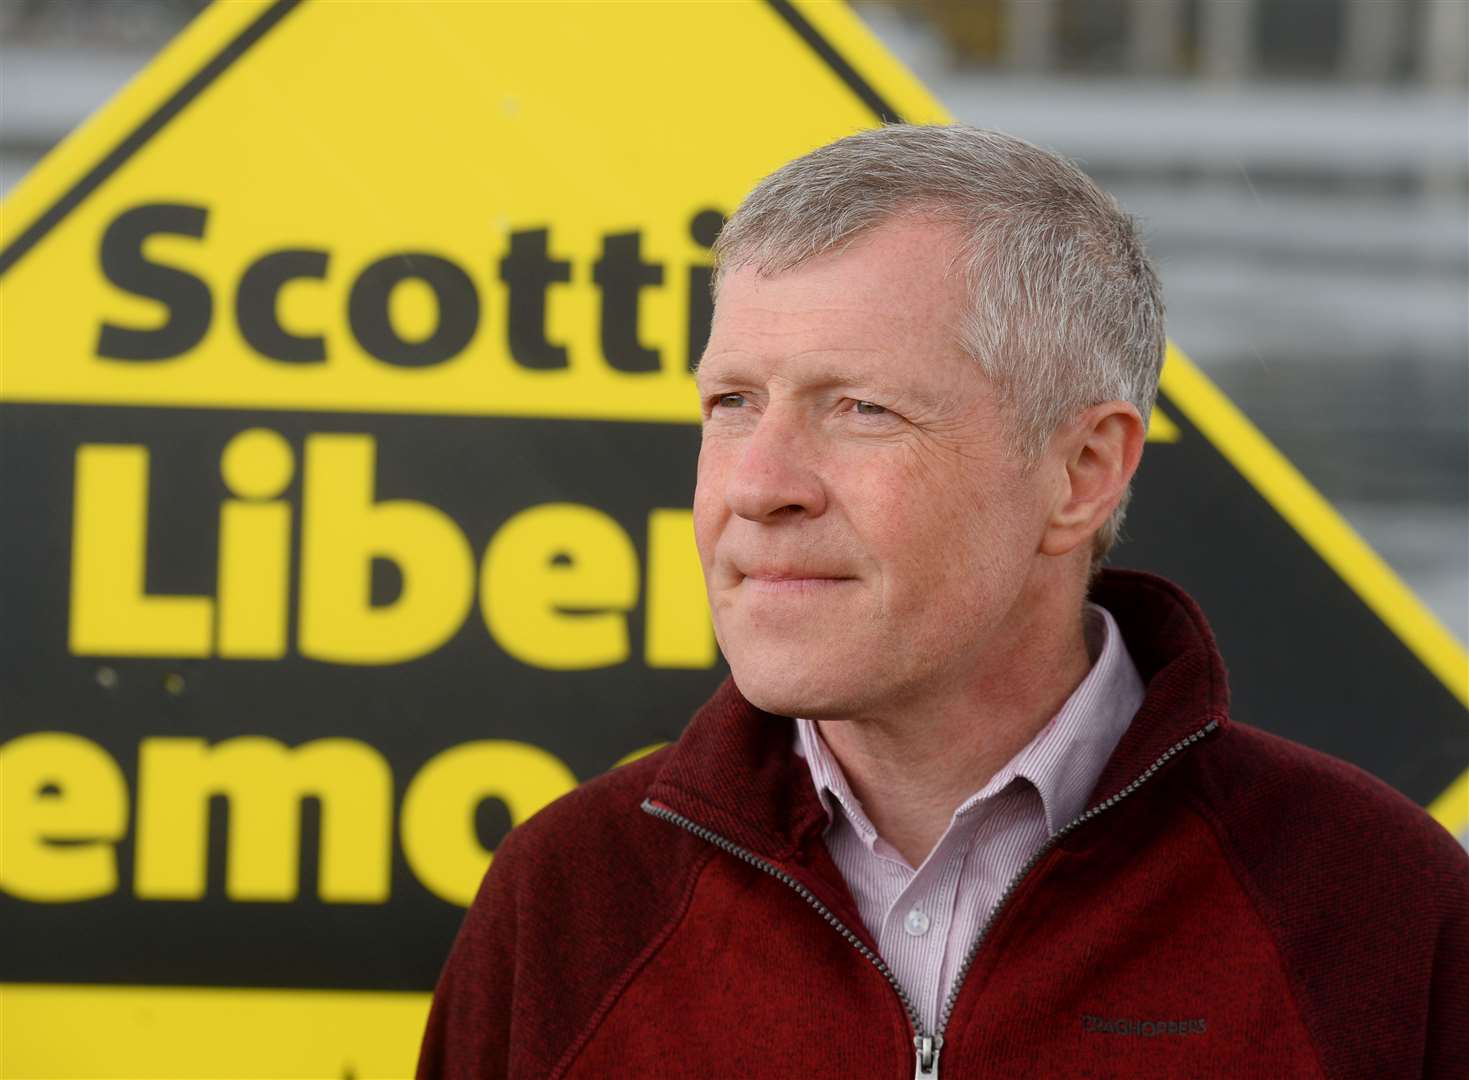 Willie Rennie has led the Scottish Liberal Democrats since 2011. Picture: Gary Anthony